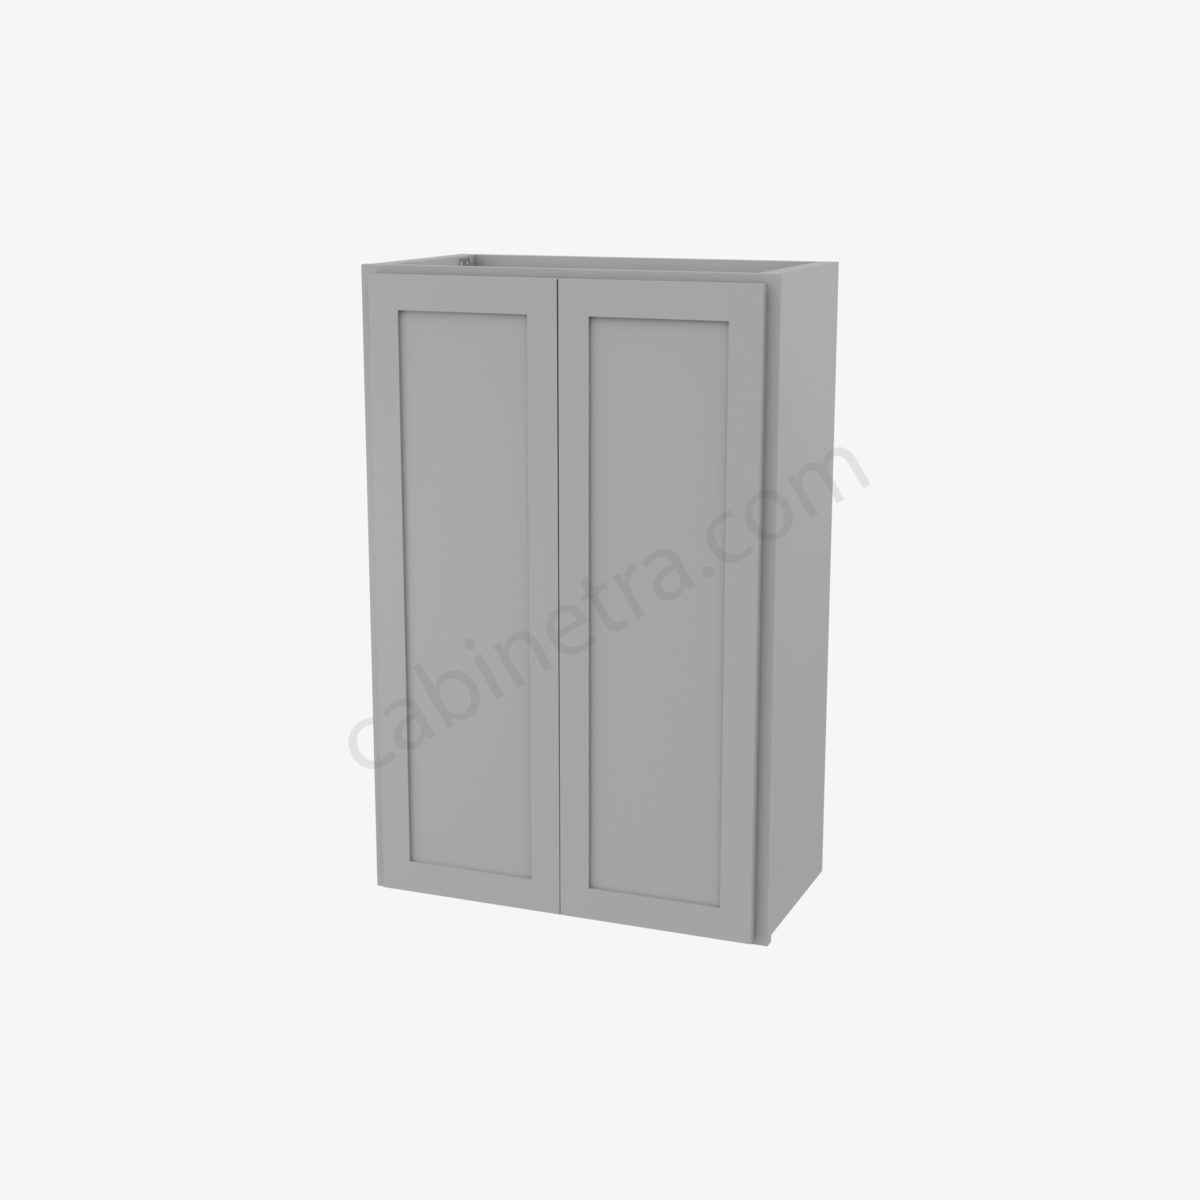 AB W2436B 0 Forevermark Lait Gray Shaker Cabinetra scaled